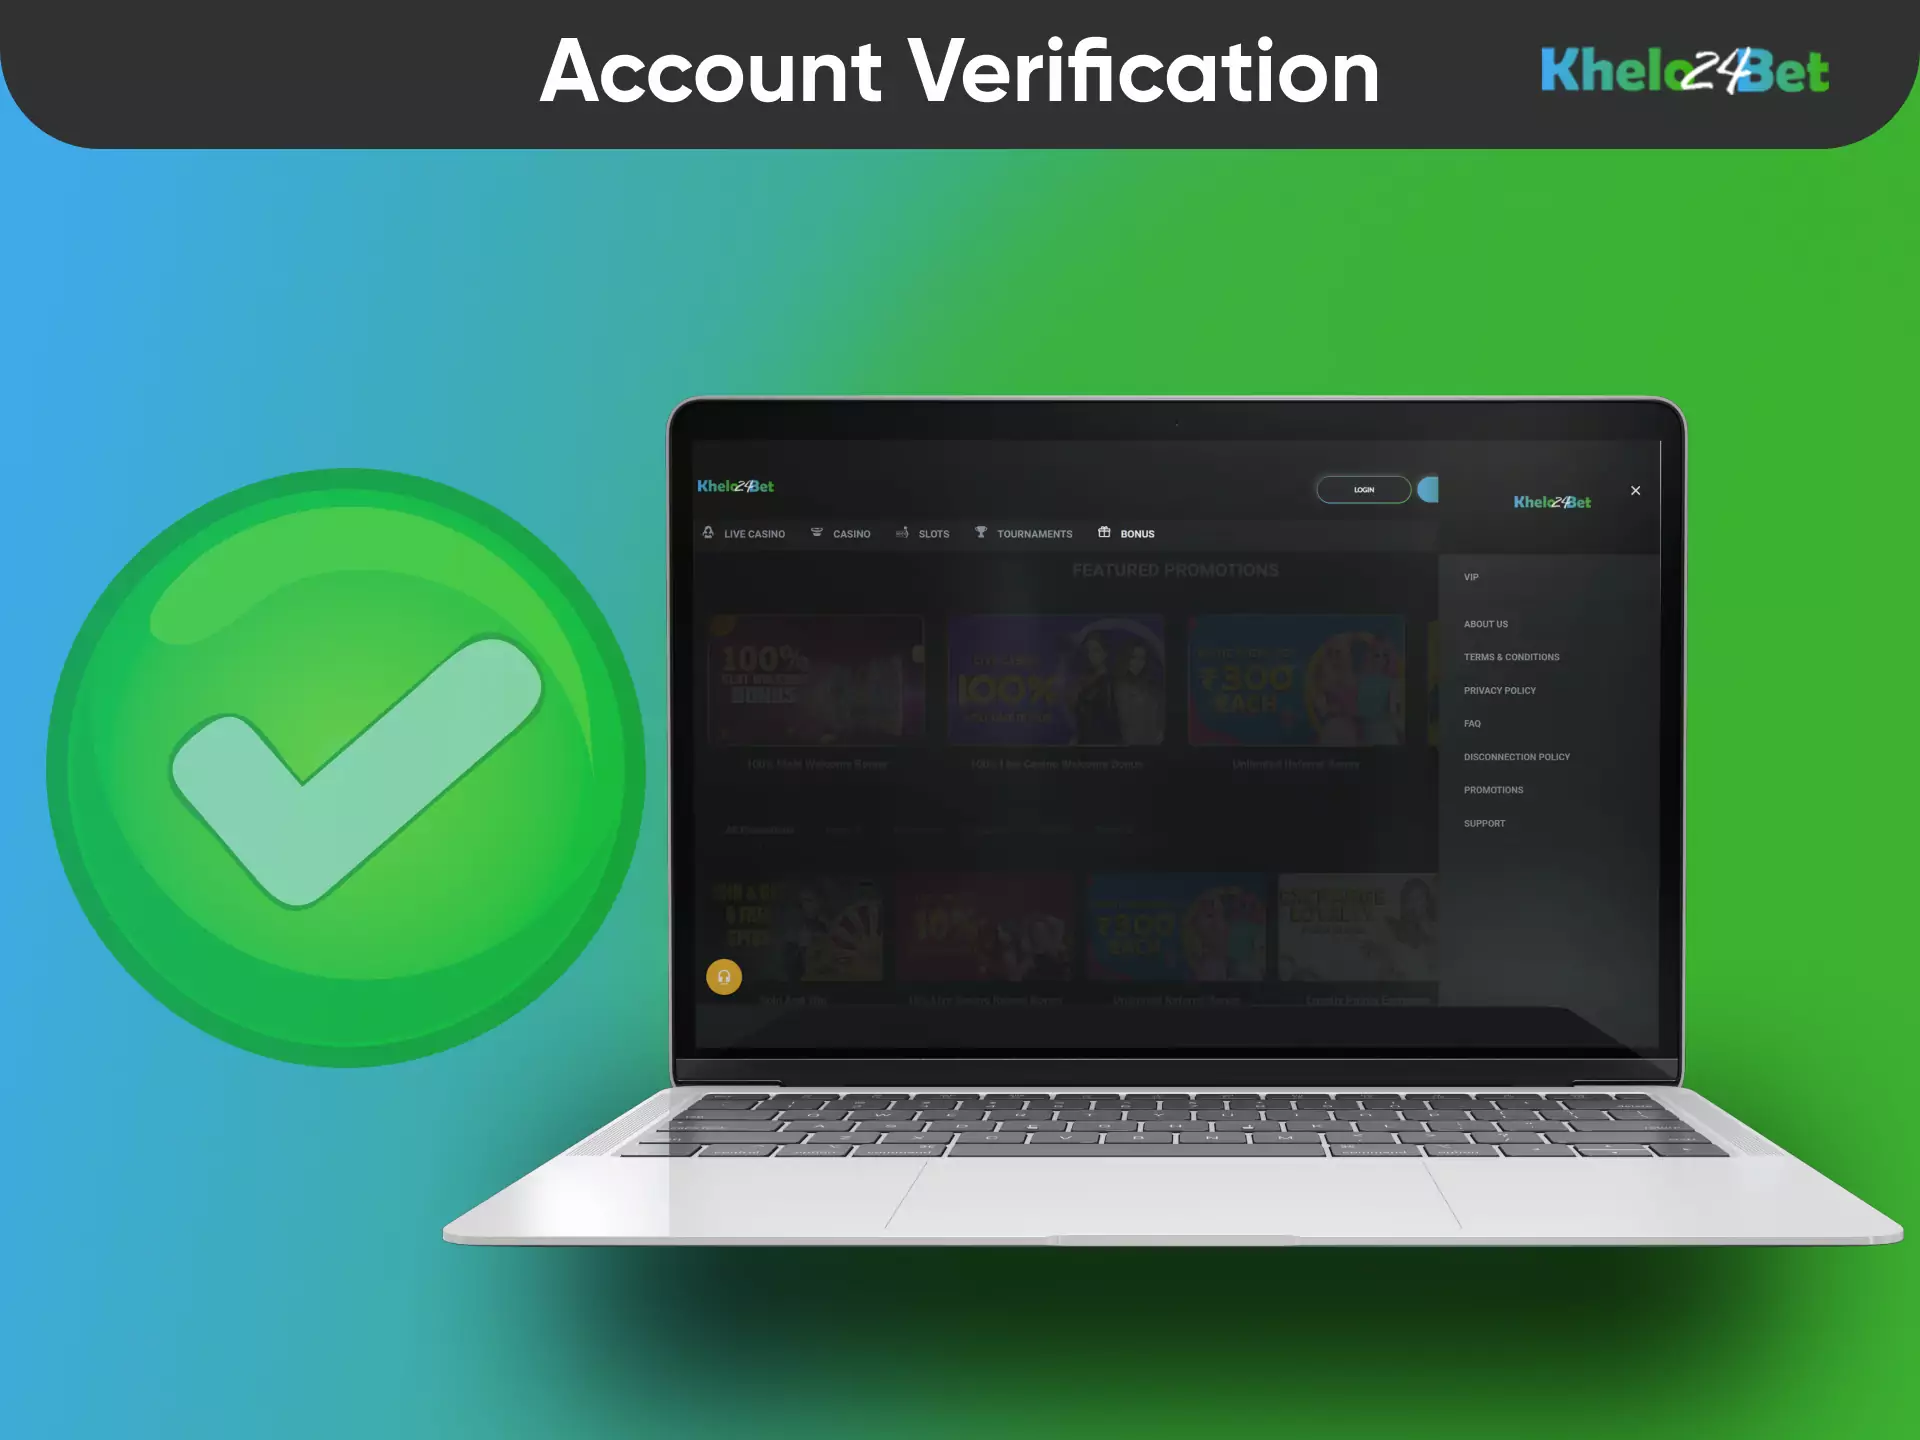 Verify the Khelo24bet site for being able to use all the features.